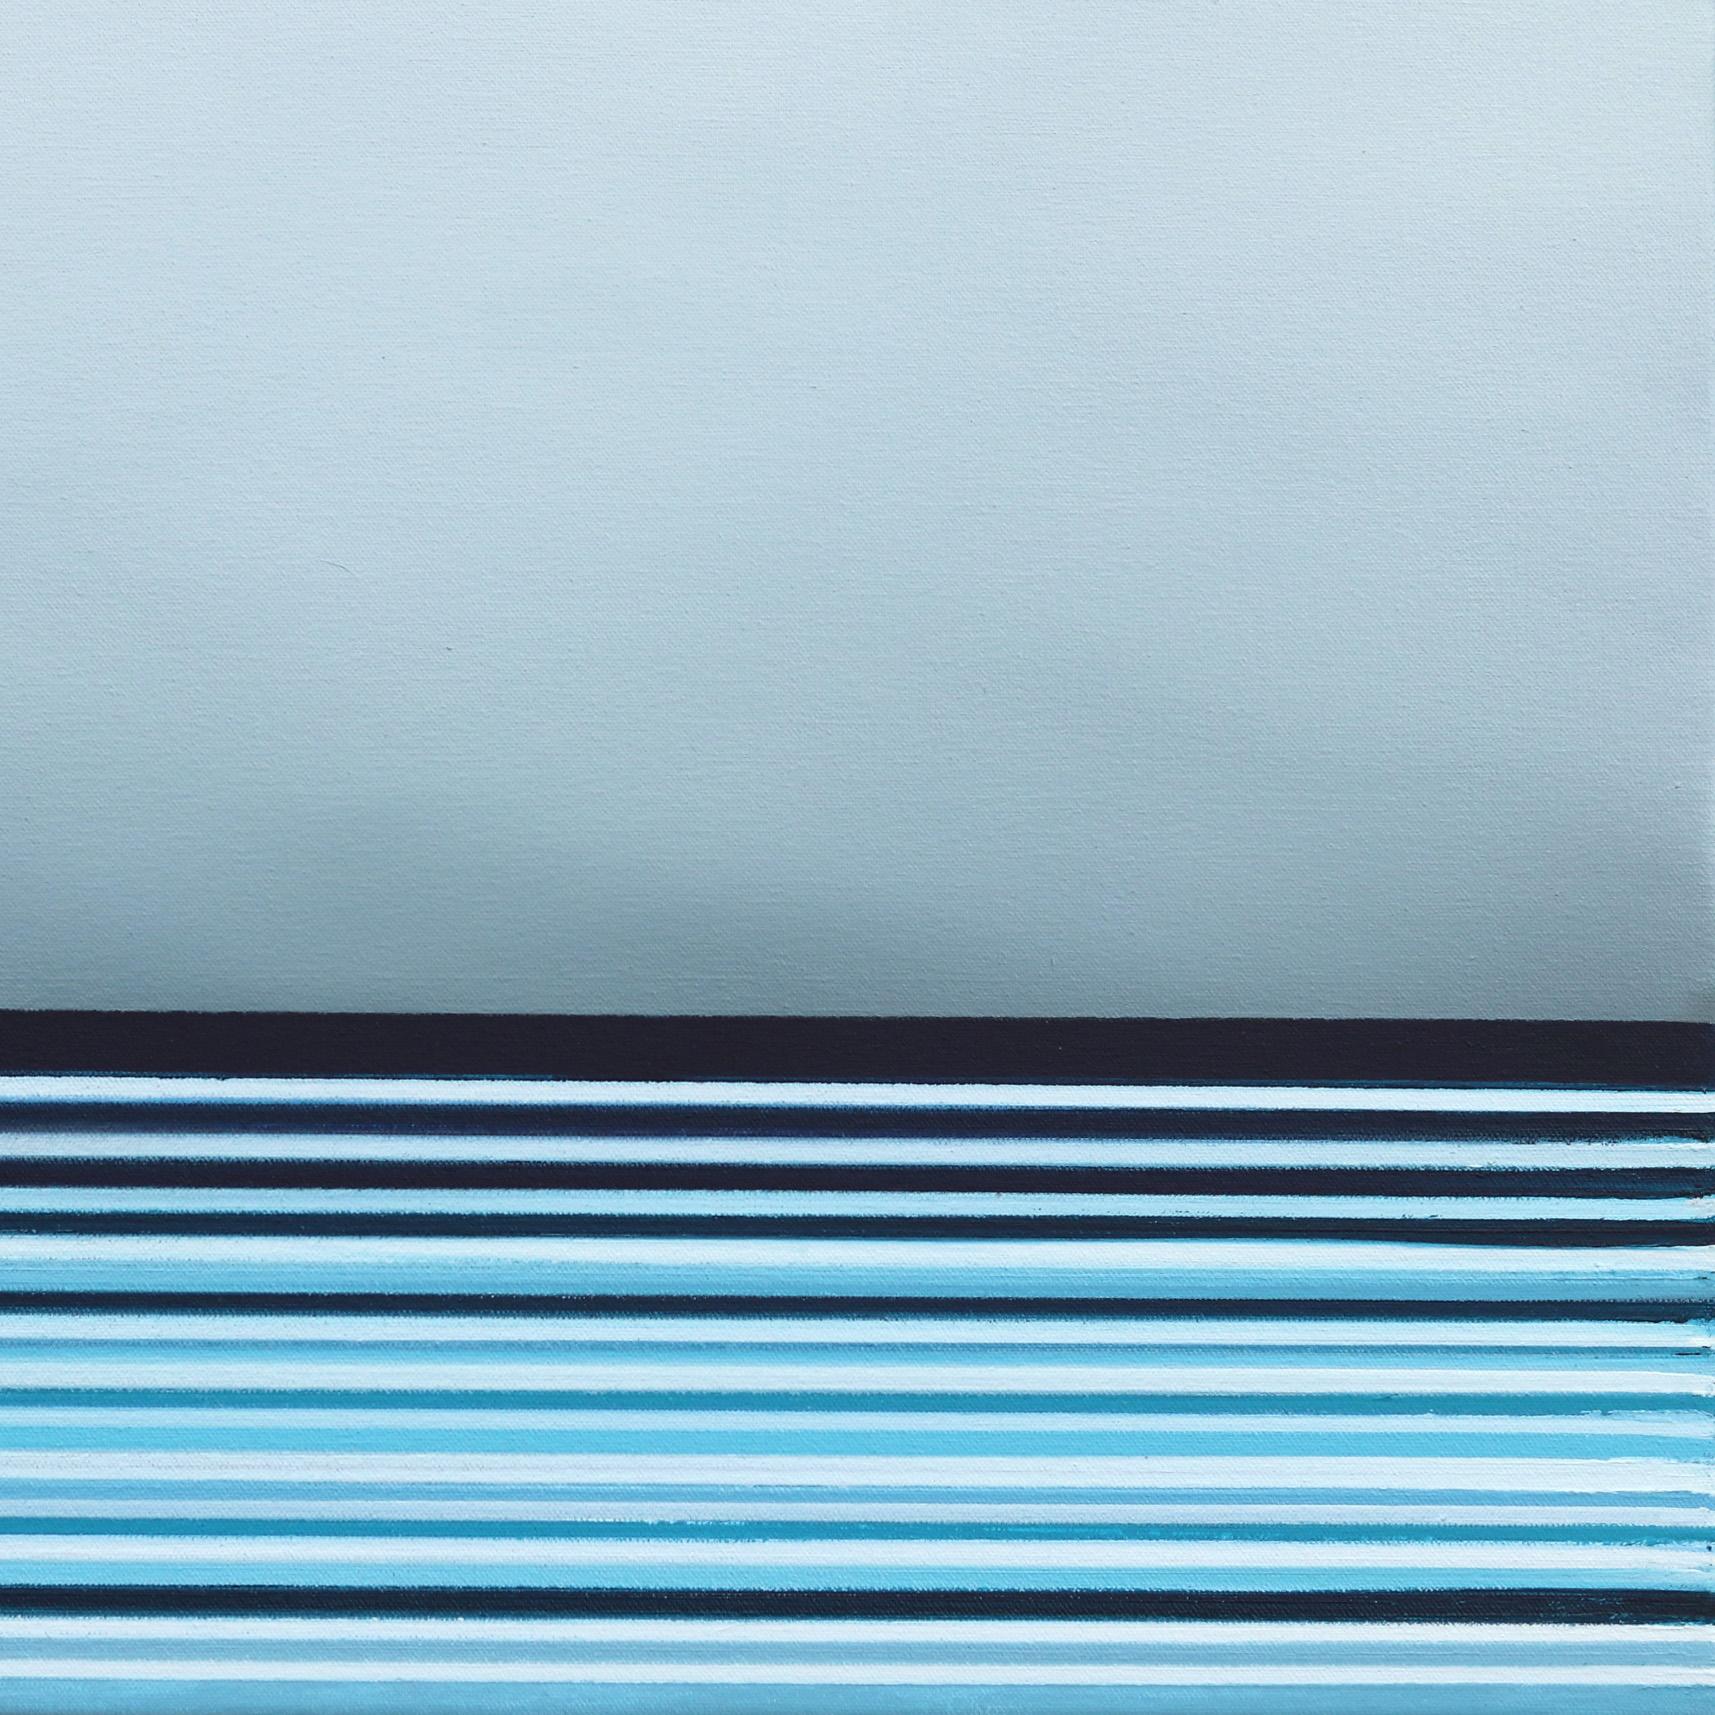 Untitled No. 463 - Framed Contemporary Minimalist Blue Artwork For Sale 5